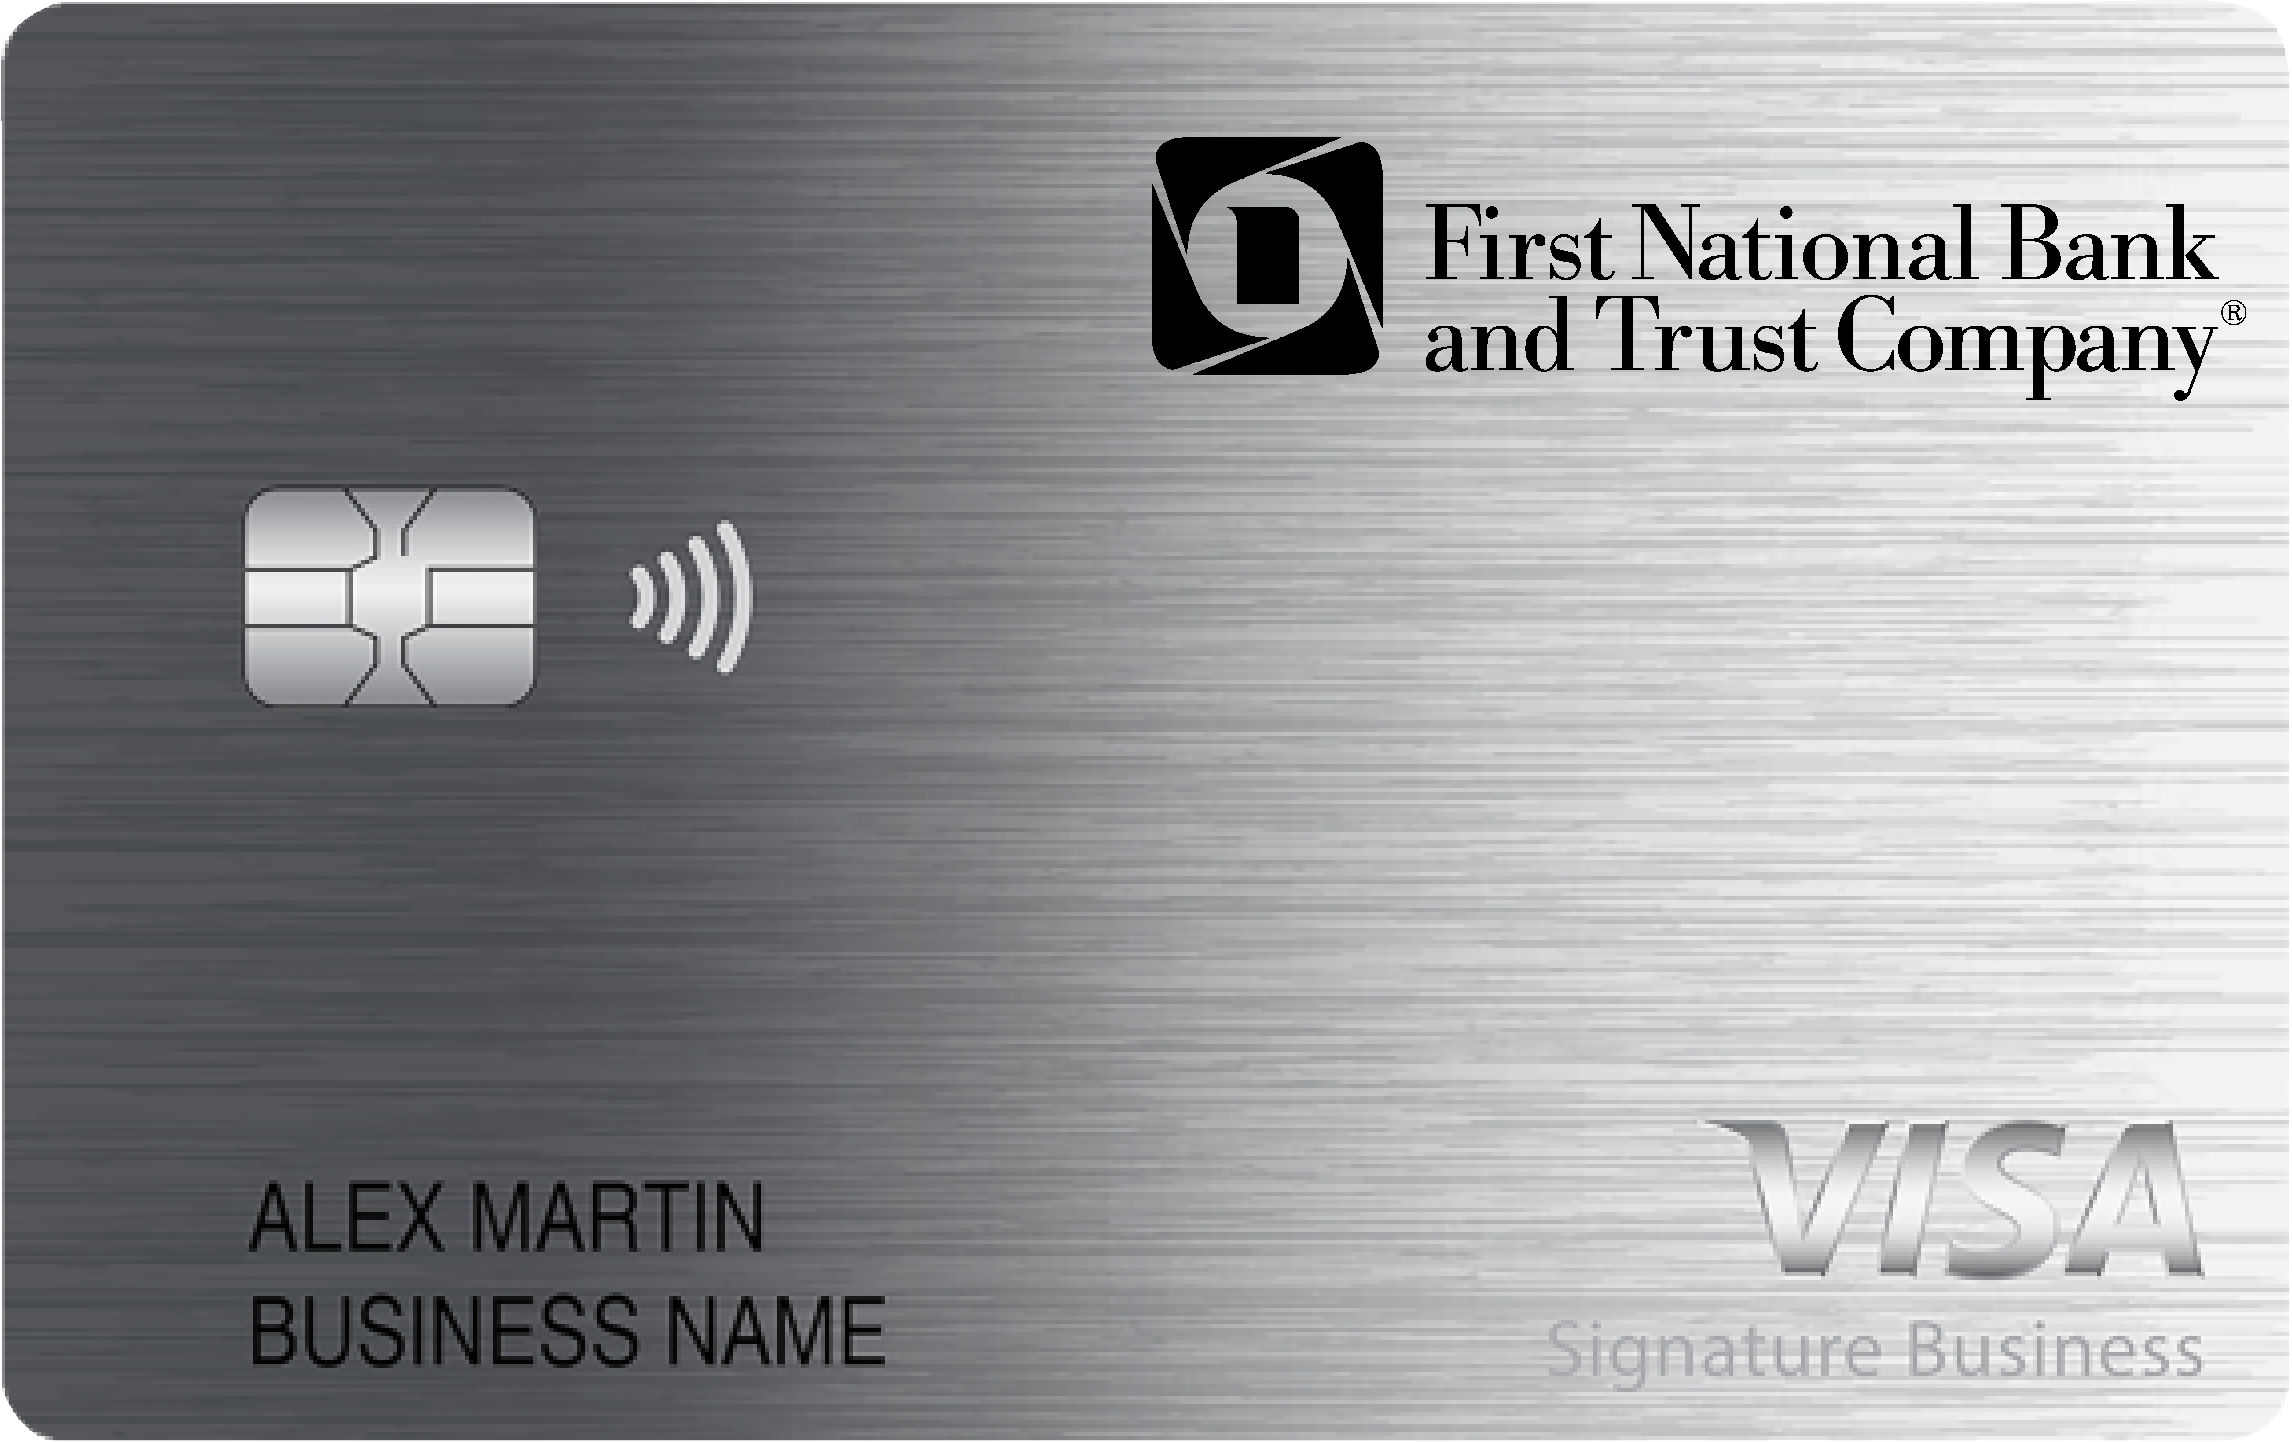 First National Bank and Trust Company Smart Business Rewards Card